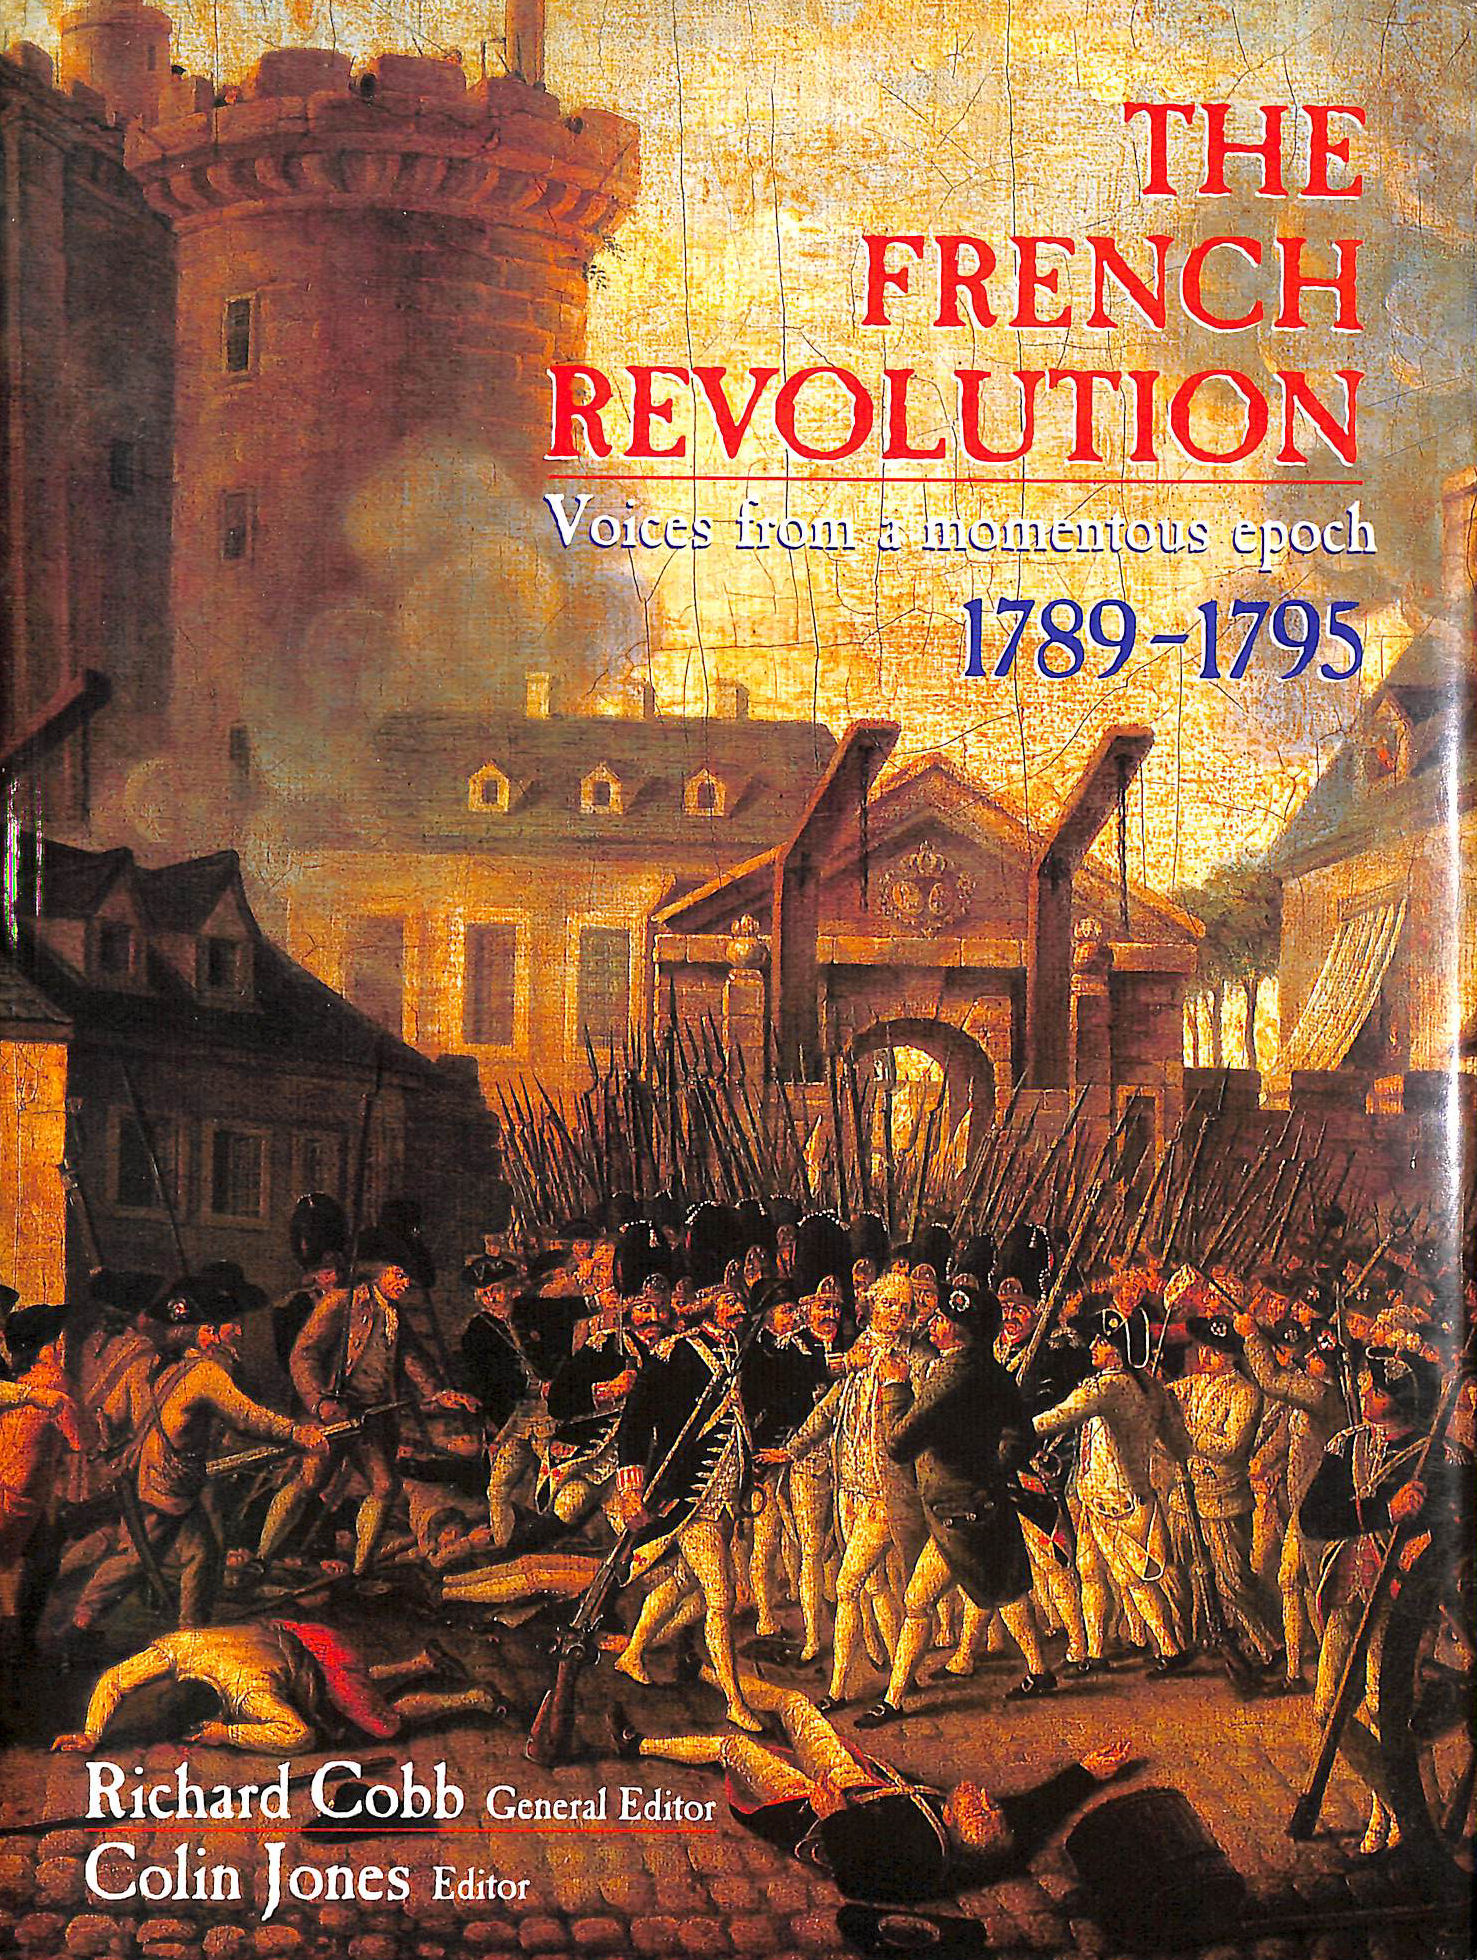 COBB, RICHARD; JONES, COLIN A. - The French Revolution: Voices from a Momentous Epoch, 1789-95